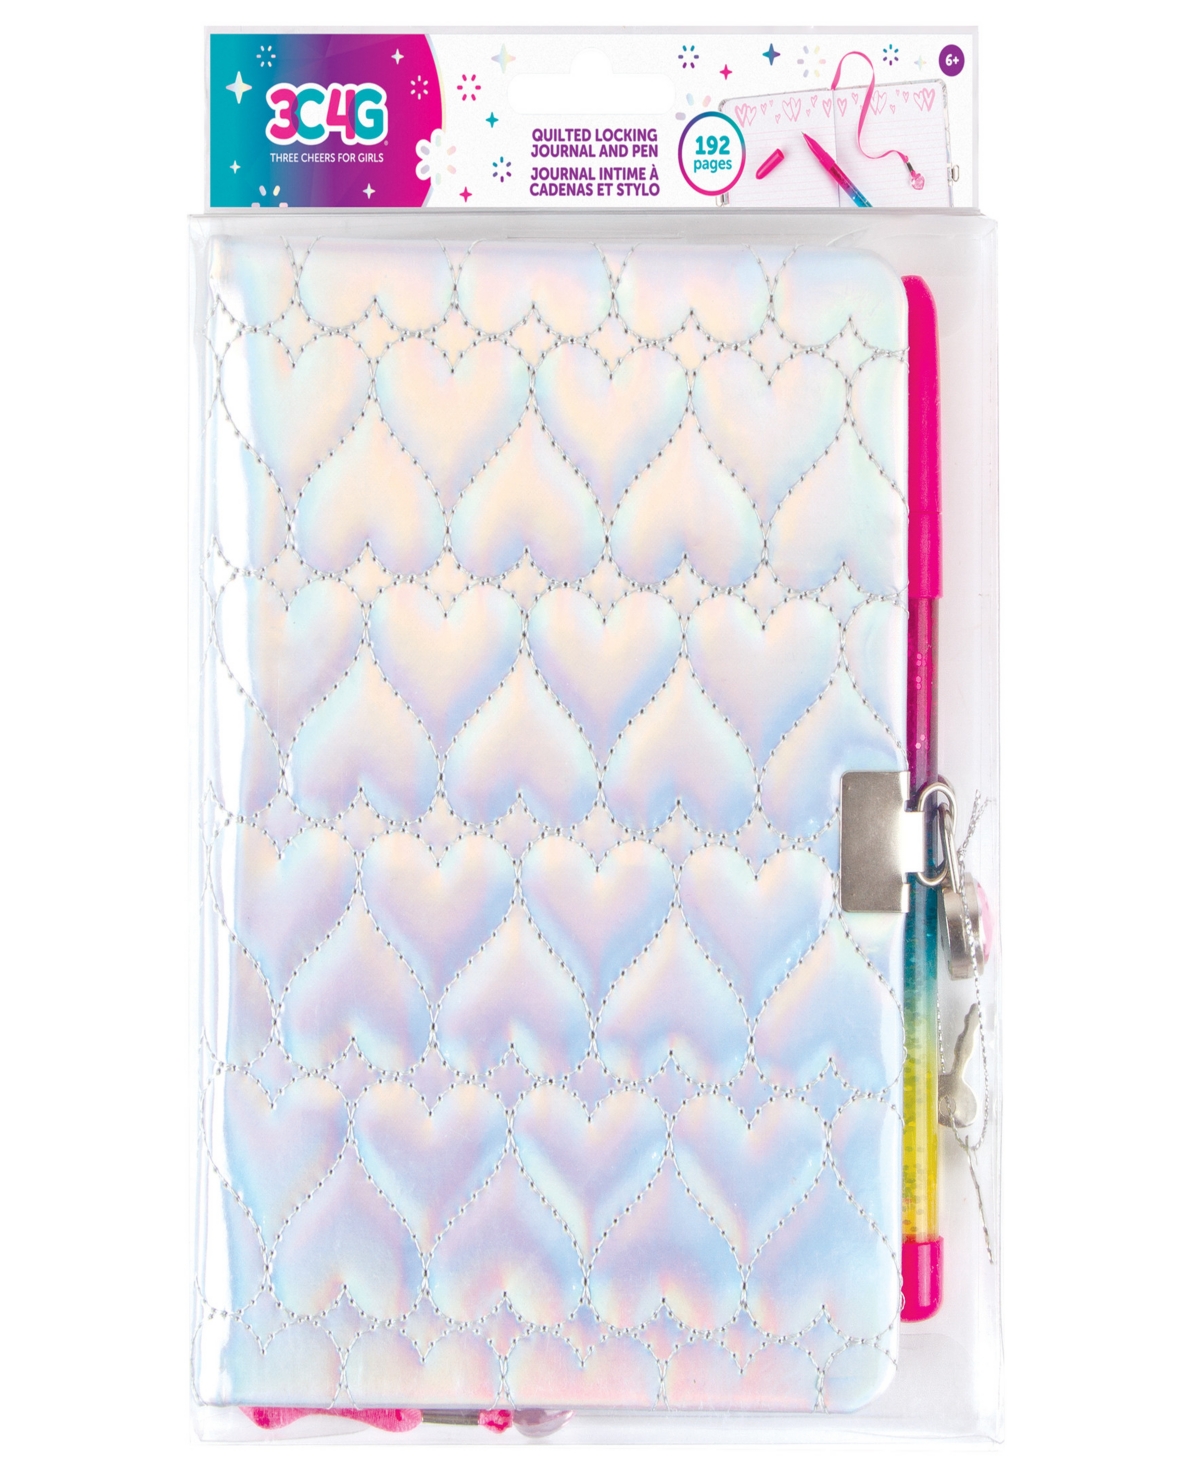 Three Cheers For Girls 3c4g: Quilted Locking Journal Pen, Silver-tone With Rainbow Pen, Make It Real, Teens Tweens Girls, 1 In Multi